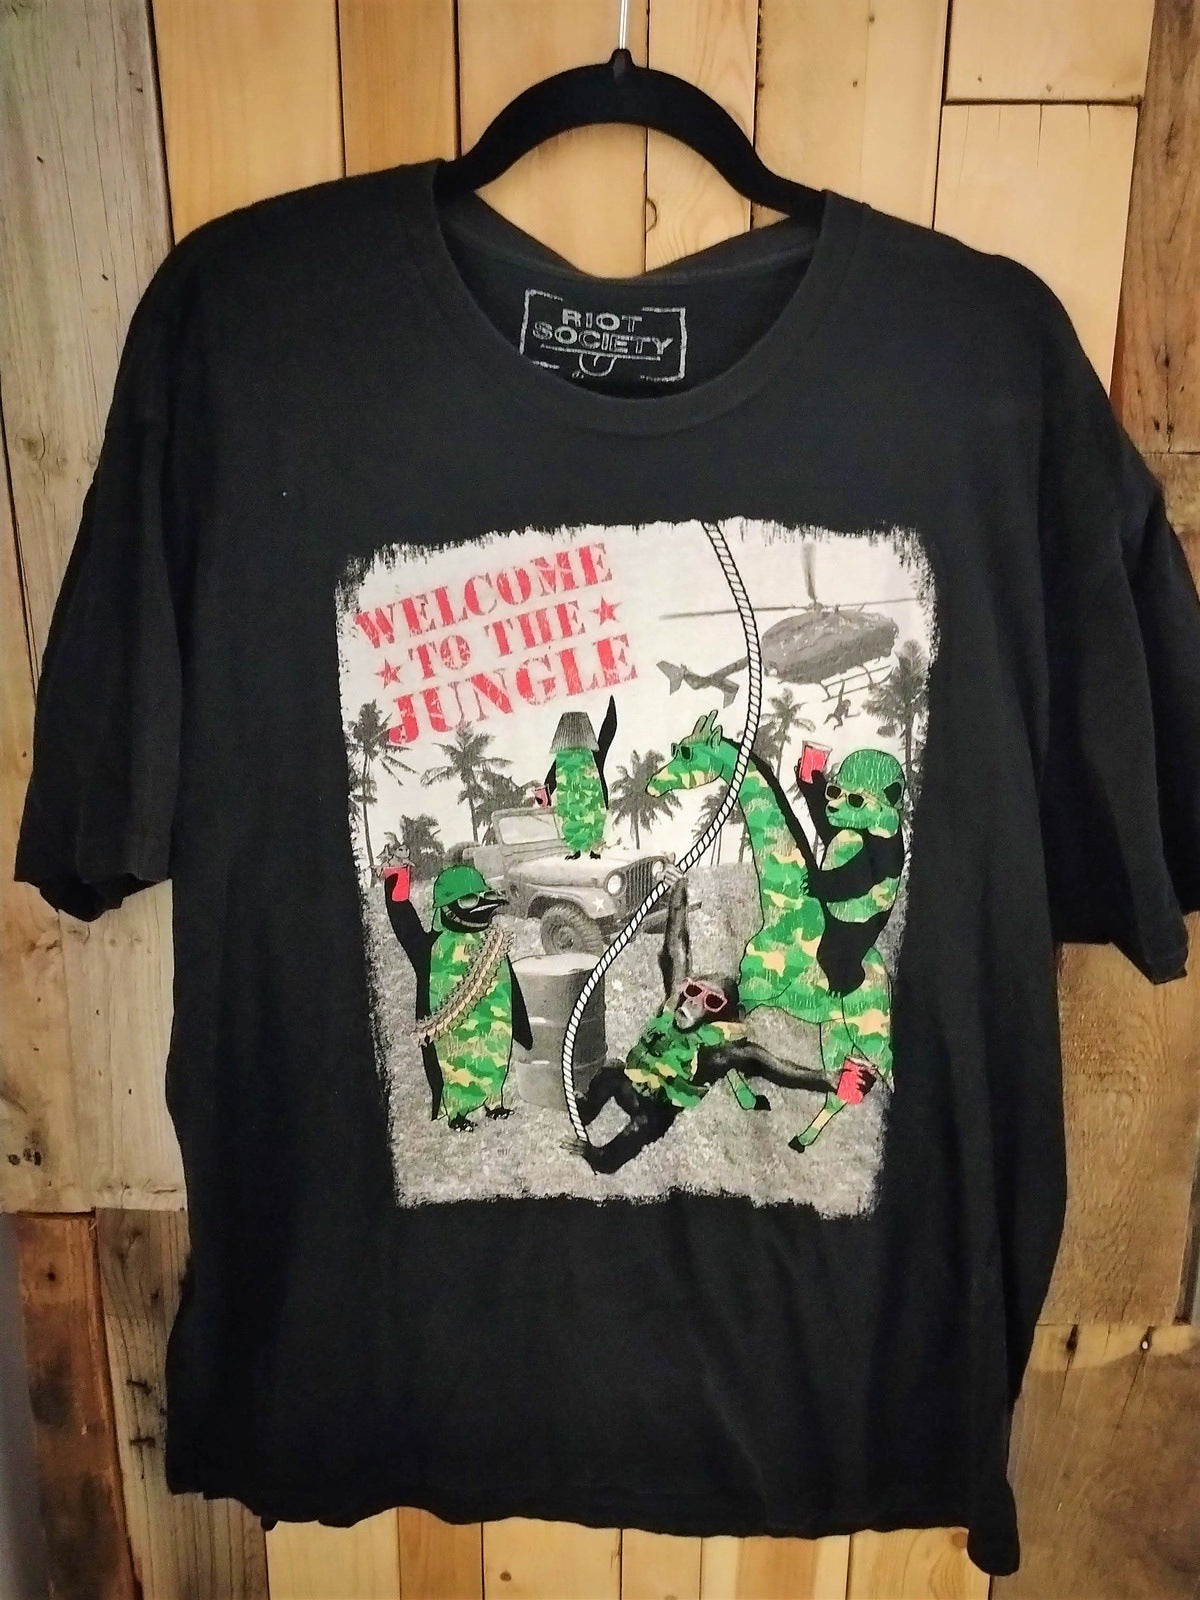 Welcome To The Jungle by Riot Society T Shirt Size XL